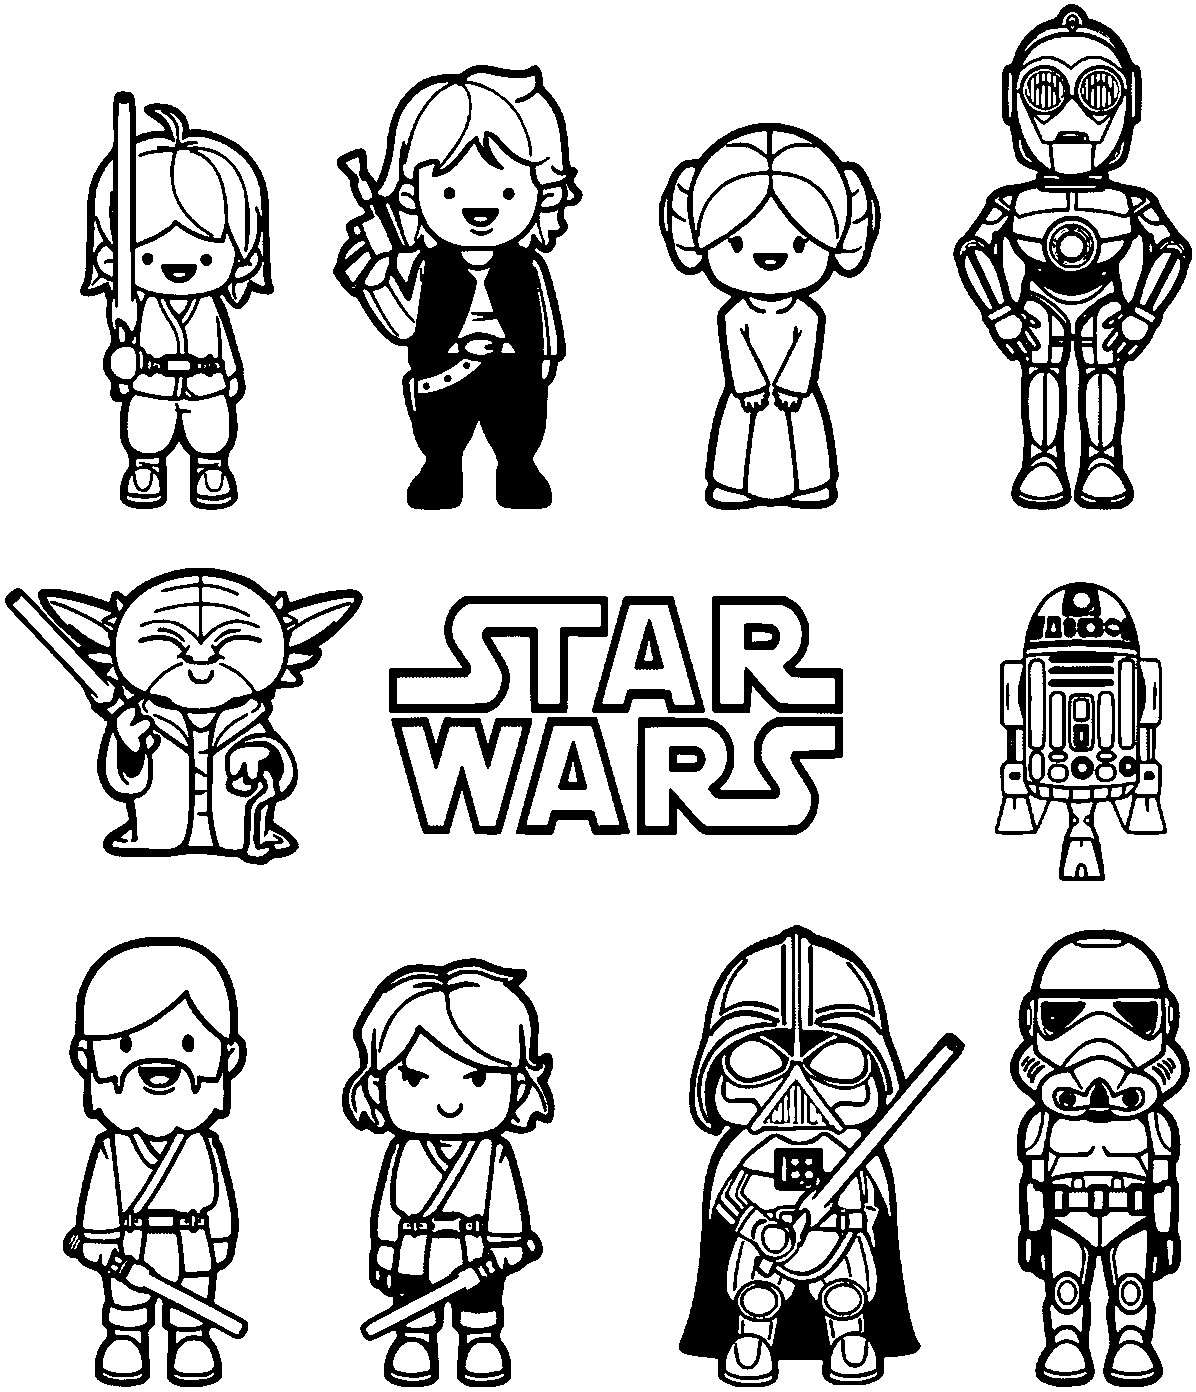 Coloring Pages For Boys Star Wwars
 Star Wars Coloring Pages Luke Skywalker Coloring Home